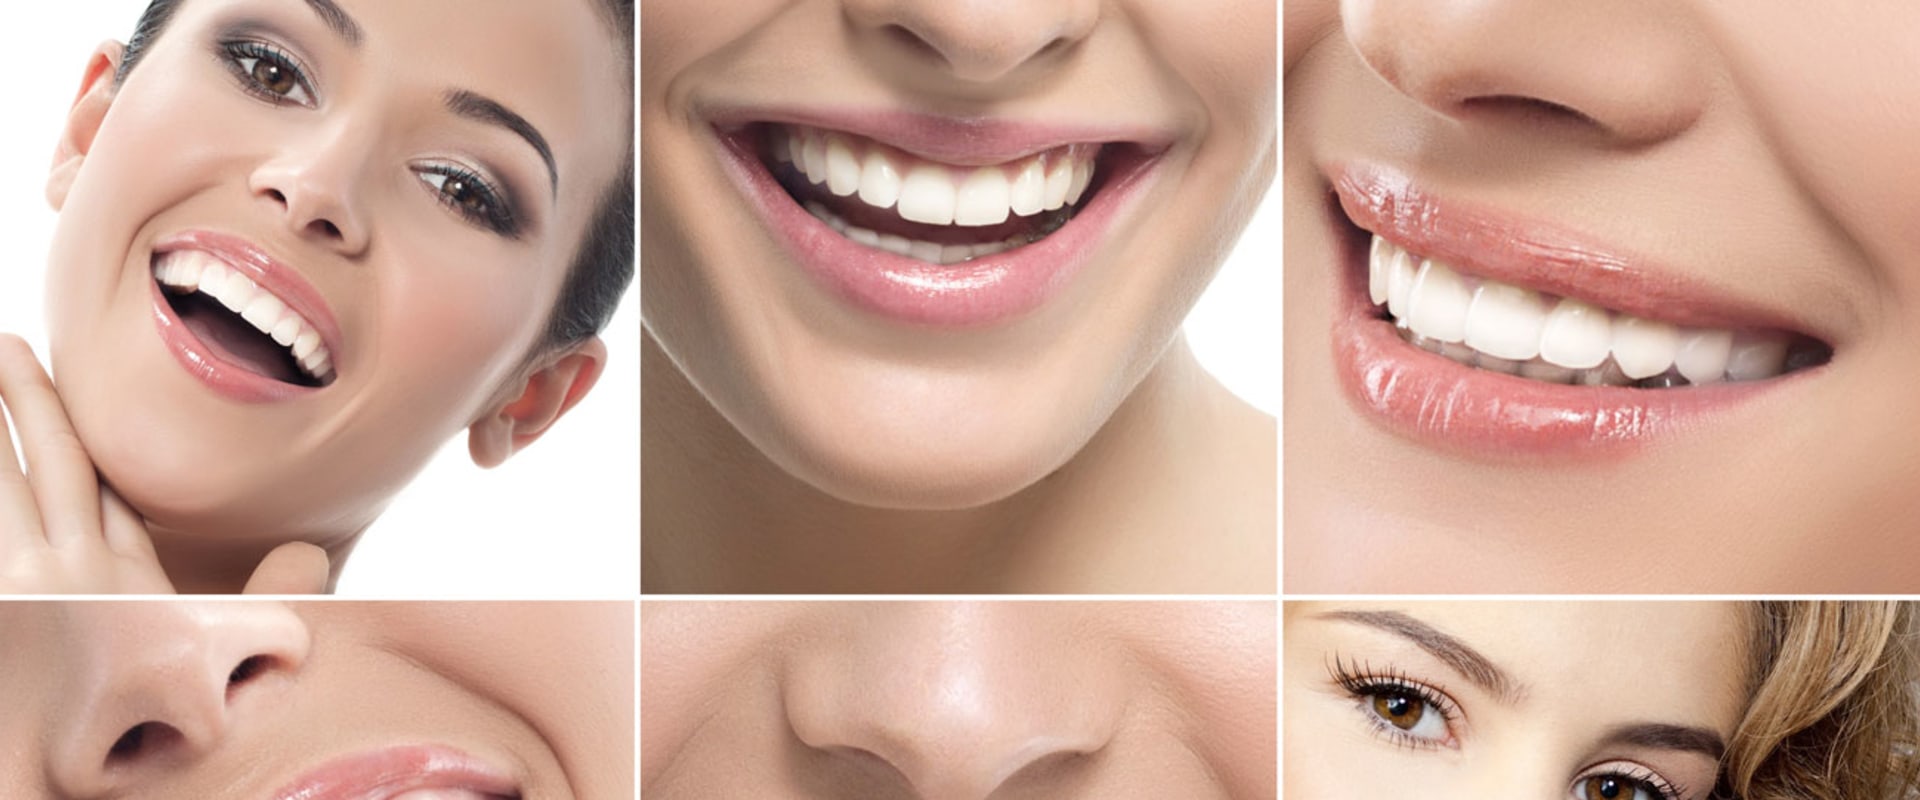 What do you look for in a prosthodontist?